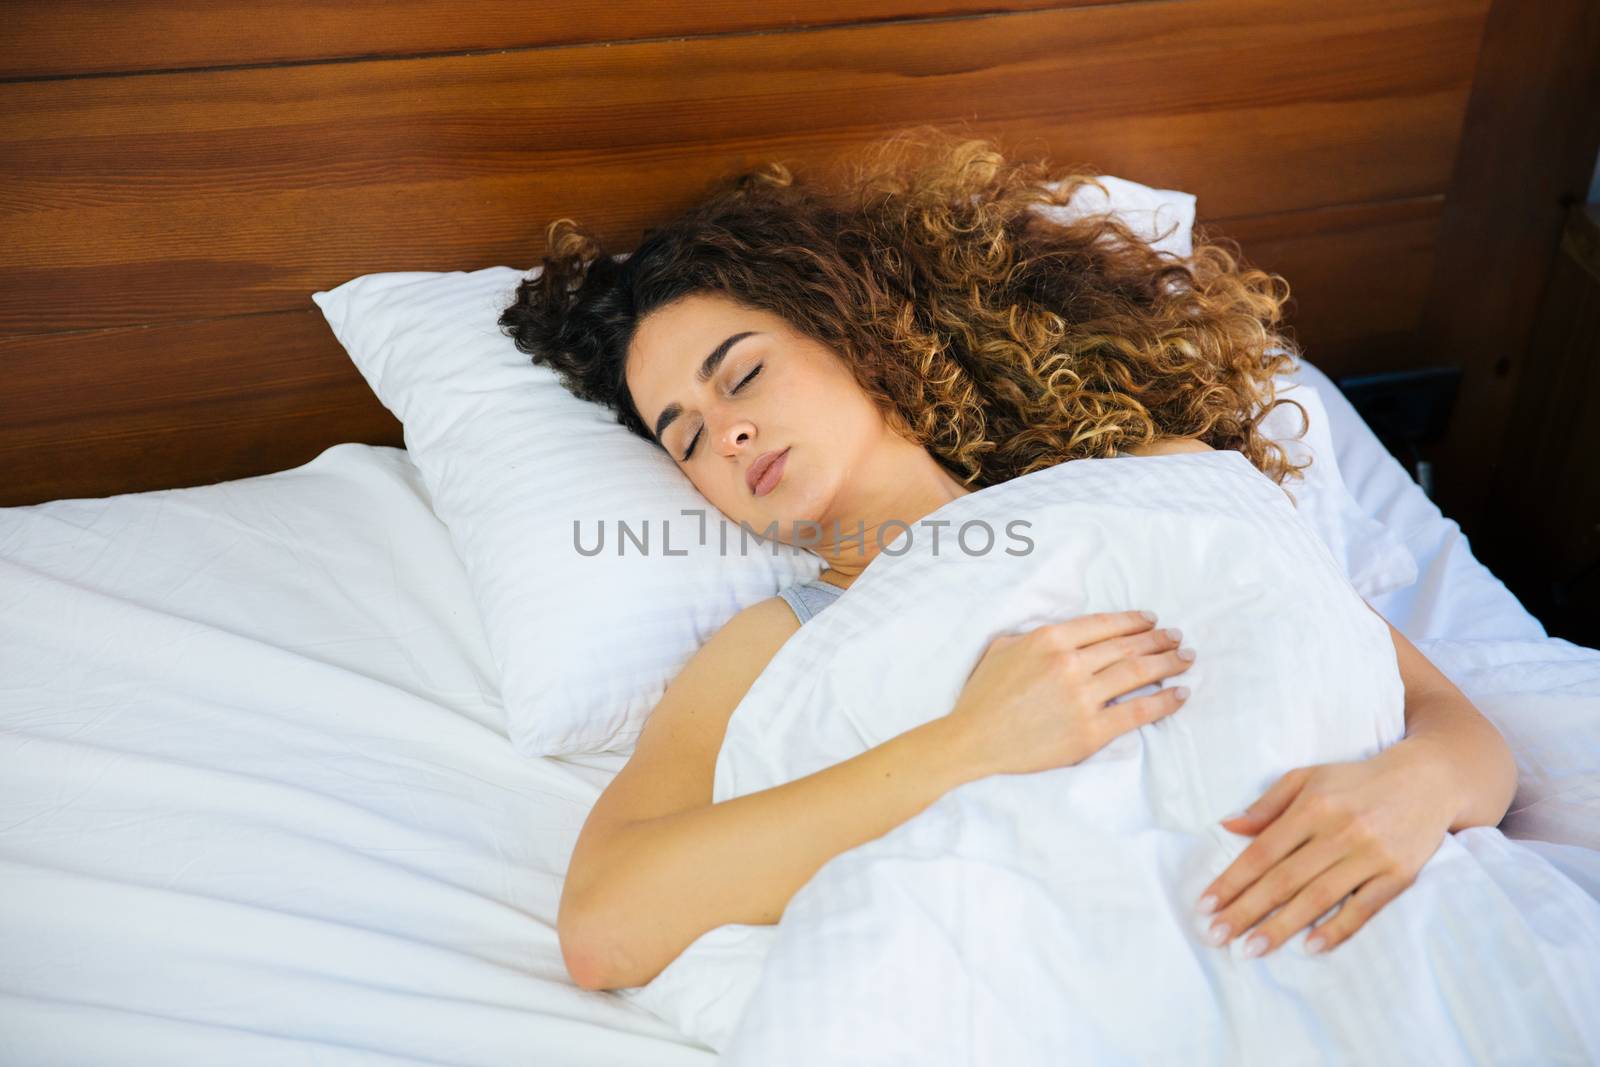 Young beautiful woman sleeping in her bed and relaxing in the morning, she is resting with eyes closed.